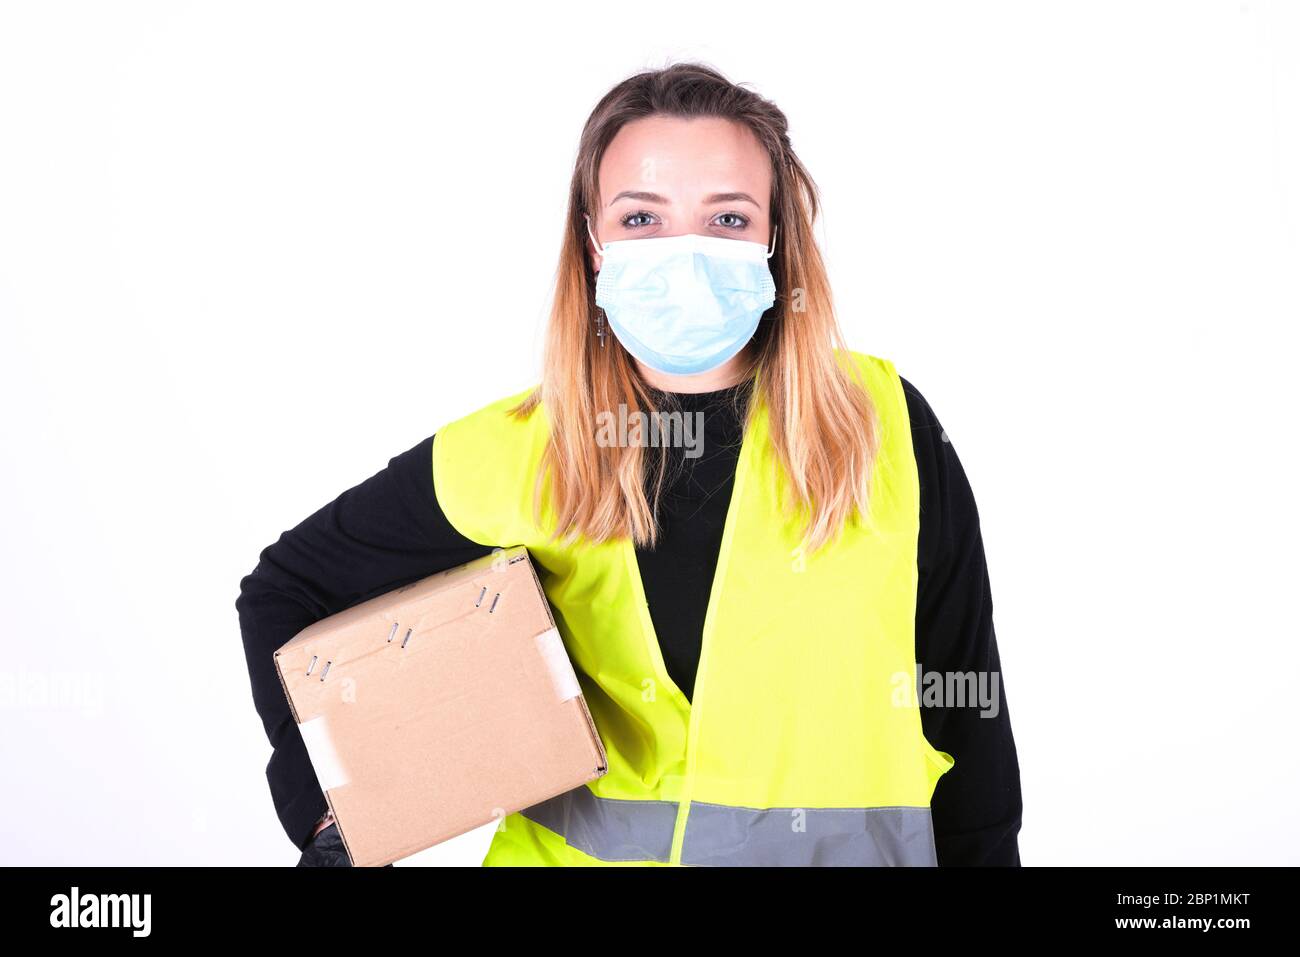 postman with yellow giachet worker in the white background Stock Photo